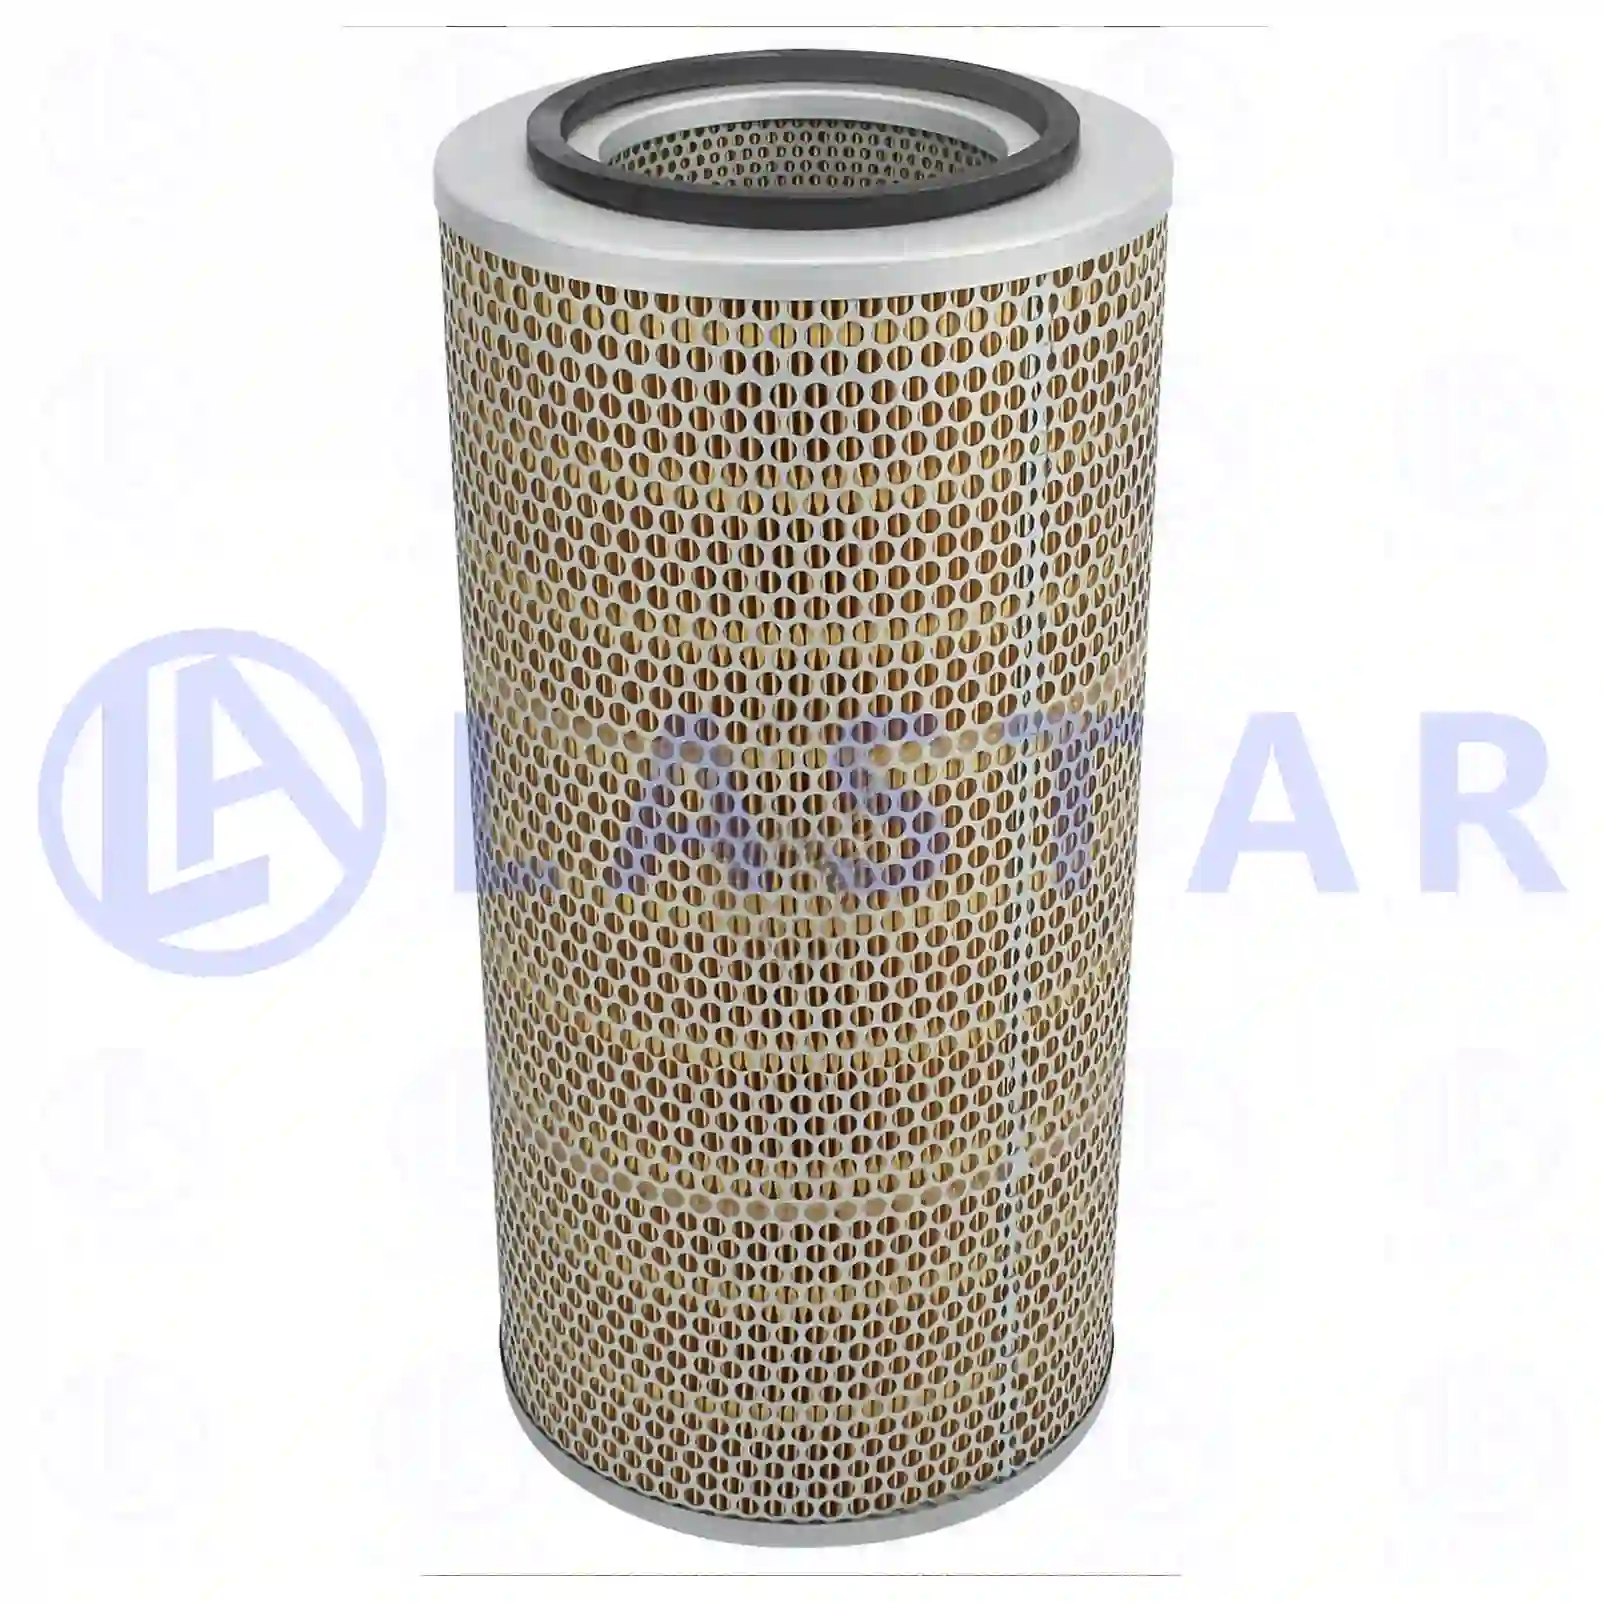 Air filter, 77706040, 060503834, 60503834, E156251, 3I-0879, 10947904, 120948702, 0006431690, 0006431691, 0006431692, 0607179, 607179, ABU8524, 00661874, 04278774, 29504356, 43262100, 988596, 98859600, 01901925, 04134403, 04193519, 04980649, 21650569, 605412970050, 698089, 1318965, 991312, 991612, 1170781, 1470637, 1470695, 1470718, 4134403, 8108340057, F291200090100, F291202090100, F926200090010, 01901925, 01902125, 02165056, 07126157, 08322989, 42015789, 74980649, Y05775902, DNP181137, 2994206, 9307856, 25096238, 9974143, 9304990010, 04445301, 00698089, 01901925, 01902125, 02165059, 04980649, 08322988, 08322989, 1901925, 2165059, 42015056, 4980649, 74980649, AZ48195, 24000504, 01901925, 02165056, 02165059, 04980649, 5103365, 5106181, 510618108, 7367183, 7367184, 04565092304, 08083040048, 08108205005, 08183040040, 64083010001, 64083010003, 64083040003, 81082050005, 81083040040, 81083040041, 81083040048, 81083040057, 81083040060, 88183040040, N2083040012, 0010945104, 0010947904, 0120948702, 3500947004, 3510947004, 4050940202, 8319086094, 605412970050, 020310101, 80753486, 584576, 689089, 698089, 6LS551A4, 99012190137, 99012190705, 99112190705, 0002286040, 0003653608, 0500242504, 5001829572, 6005019670, 7700042054, R517, ABU8524, 2165059, 4631072040, 217517, 219517, 219519, 246128, 83190586094, 8319086094, 1293400212, 1293400241, 99000190137, 99012190037, 99012190137, 99012190705, 99112190705, 621204720, 631201530, 631203430, 3338849, CH12235, 4785748, 47857485, 47857487, 4785784, 660289, 6640289, T15129620B, ZG00848-0008 ||  77706040 Lastar Spare Part | Truck Spare Parts, Auotomotive Spare Parts Air filter, 77706040, 060503834, 60503834, E156251, 3I-0879, 10947904, 120948702, 0006431690, 0006431691, 0006431692, 0607179, 607179, ABU8524, 00661874, 04278774, 29504356, 43262100, 988596, 98859600, 01901925, 04134403, 04193519, 04980649, 21650569, 605412970050, 698089, 1318965, 991312, 991612, 1170781, 1470637, 1470695, 1470718, 4134403, 8108340057, F291200090100, F291202090100, F926200090010, 01901925, 01902125, 02165056, 07126157, 08322989, 42015789, 74980649, Y05775902, DNP181137, 2994206, 9307856, 25096238, 9974143, 9304990010, 04445301, 00698089, 01901925, 01902125, 02165059, 04980649, 08322988, 08322989, 1901925, 2165059, 42015056, 4980649, 74980649, AZ48195, 24000504, 01901925, 02165056, 02165059, 04980649, 5103365, 5106181, 510618108, 7367183, 7367184, 04565092304, 08083040048, 08108205005, 08183040040, 64083010001, 64083010003, 64083040003, 81082050005, 81083040040, 81083040041, 81083040048, 81083040057, 81083040060, 88183040040, N2083040012, 0010945104, 0010947904, 0120948702, 3500947004, 3510947004, 4050940202, 8319086094, 605412970050, 020310101, 80753486, 584576, 689089, 698089, 6LS551A4, 99012190137, 99012190705, 99112190705, 0002286040, 0003653608, 0500242504, 5001829572, 6005019670, 7700042054, R517, ABU8524, 2165059, 4631072040, 217517, 219517, 219519, 246128, 83190586094, 8319086094, 1293400212, 1293400241, 99000190137, 99012190037, 99012190137, 99012190705, 99112190705, 621204720, 631201530, 631203430, 3338849, CH12235, 4785748, 47857485, 47857487, 4785784, 660289, 6640289, T15129620B, ZG00848-0008 ||  77706040 Lastar Spare Part | Truck Spare Parts, Auotomotive Spare Parts